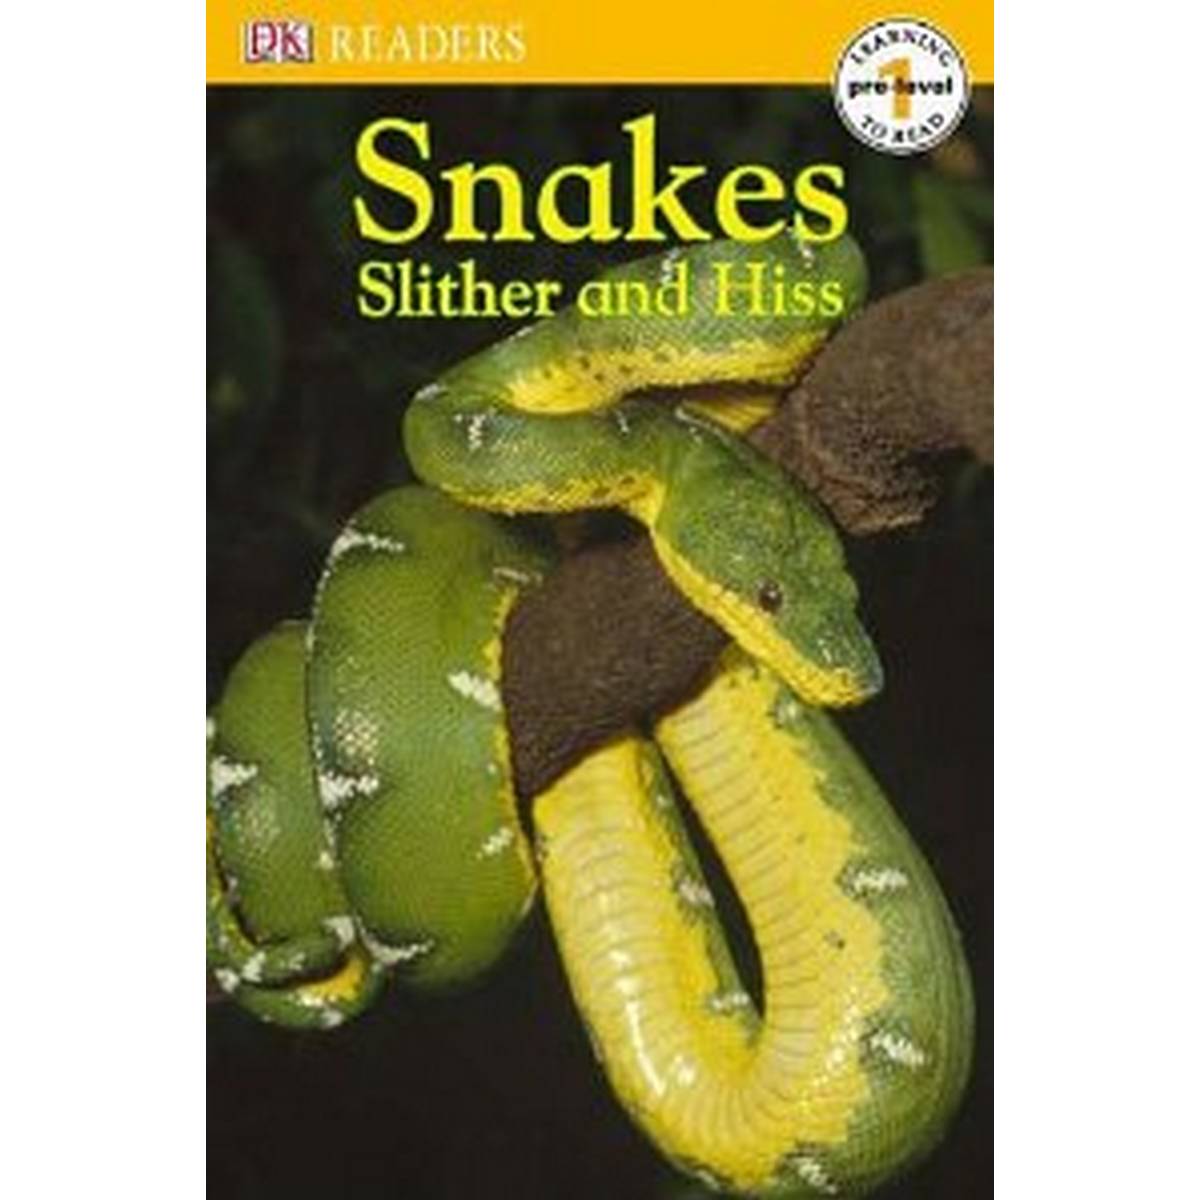 Snakes Slither and Hiss (Dk Readers pre-level 1)